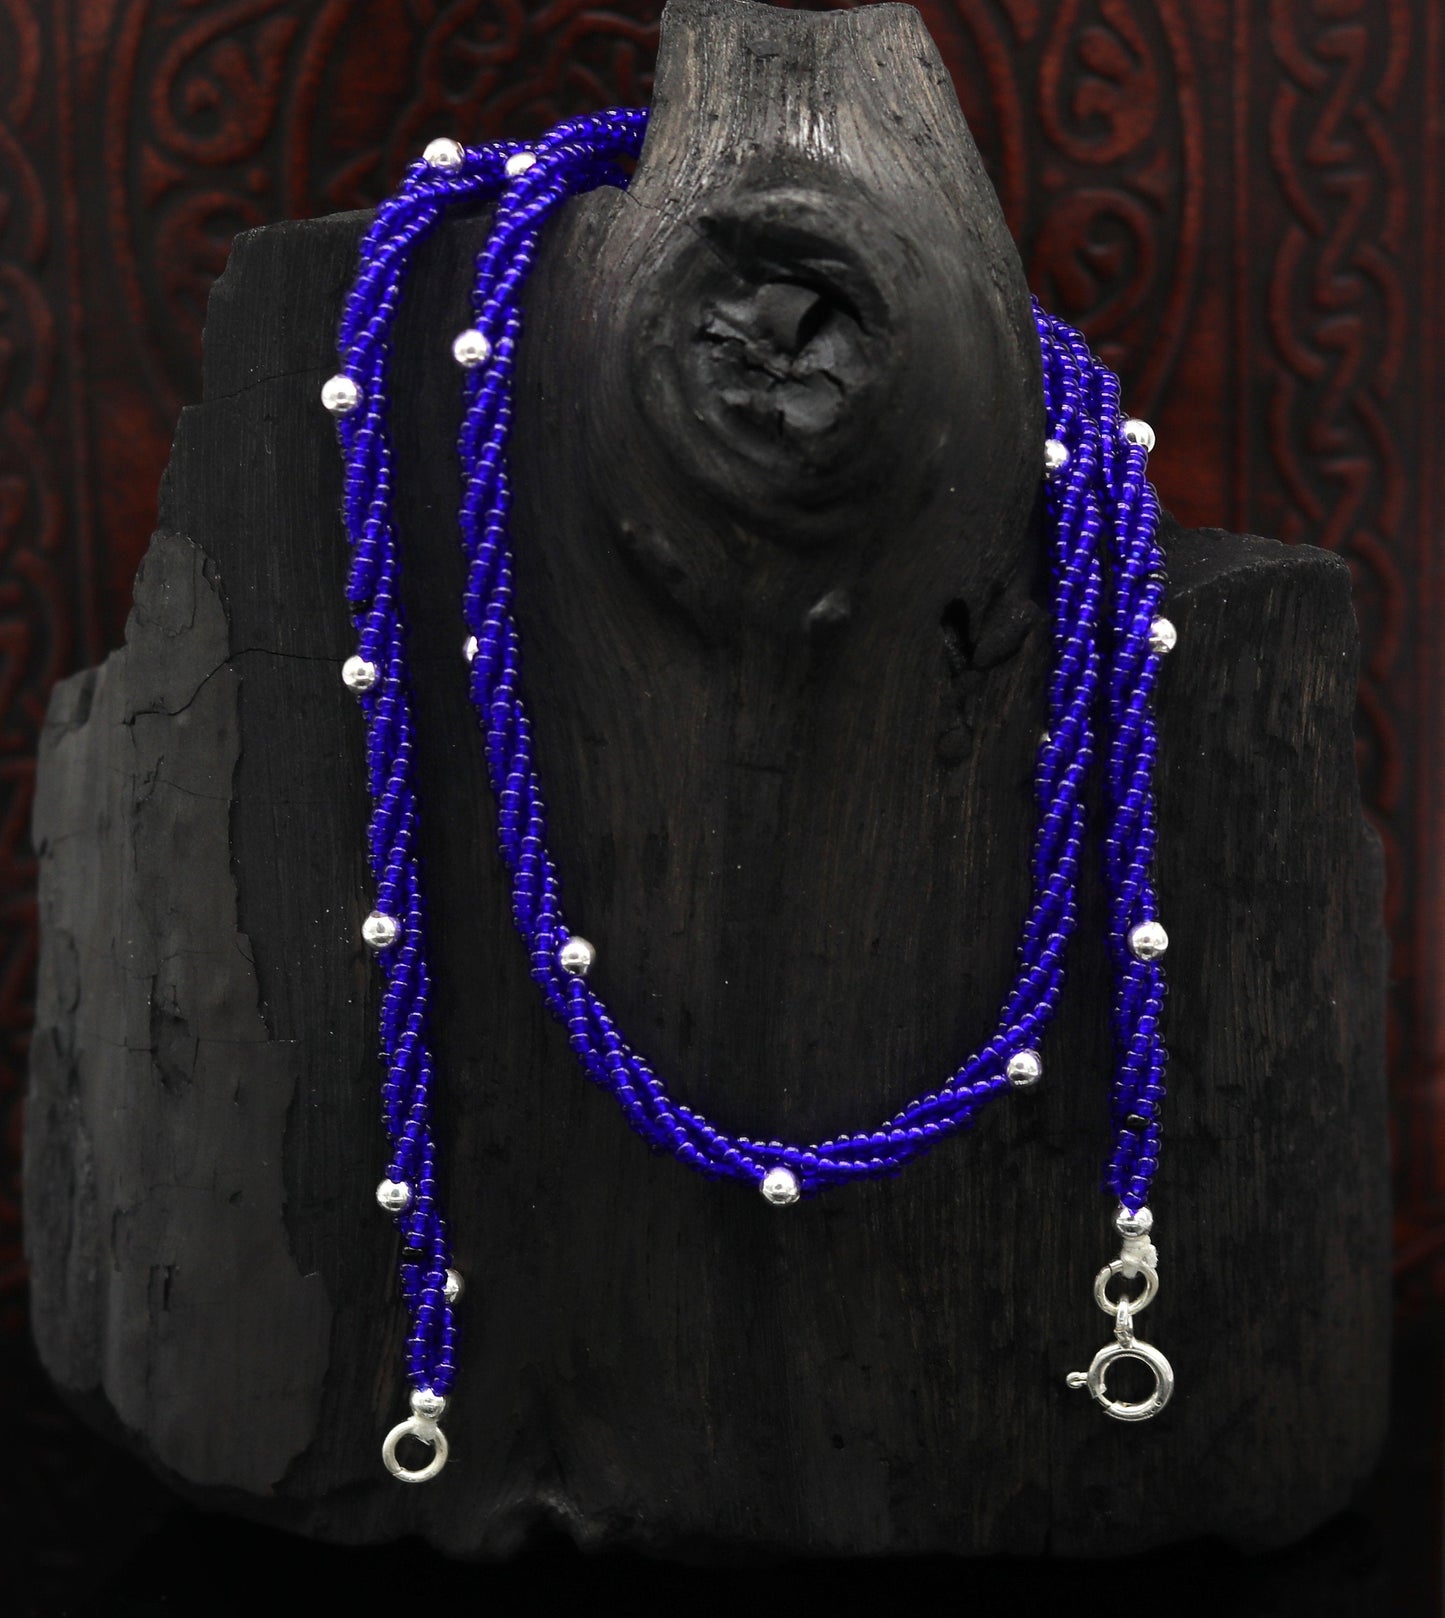 18.5" 925 sterling silver galaxy necklace triple strands blue semi precious stone beads with randomly placed silver beads necklace set137 - TRIBAL ORNAMENTS